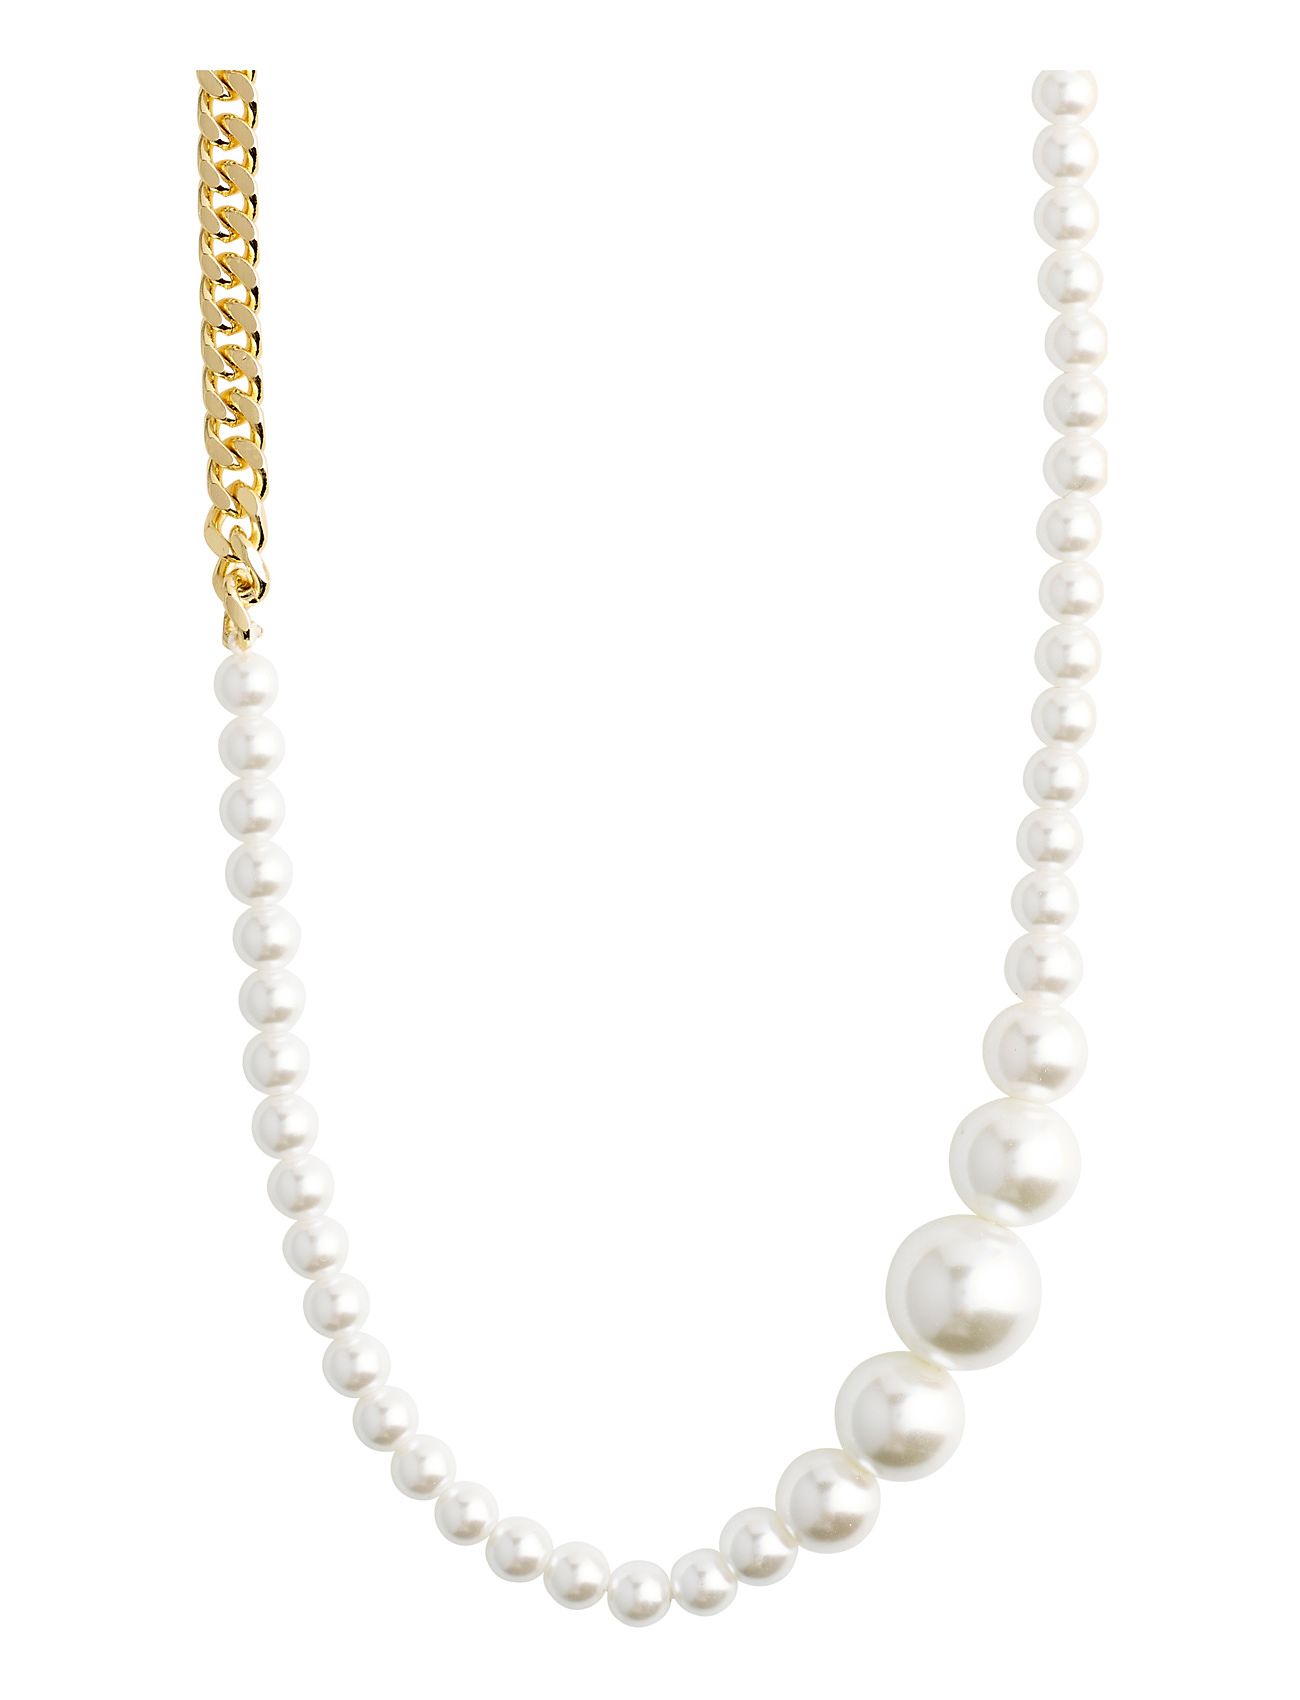 Beat Pearl Necklace Gold-Plated Accessories Jewellery Necklaces Pearl Necklaces Gold Pilgrim